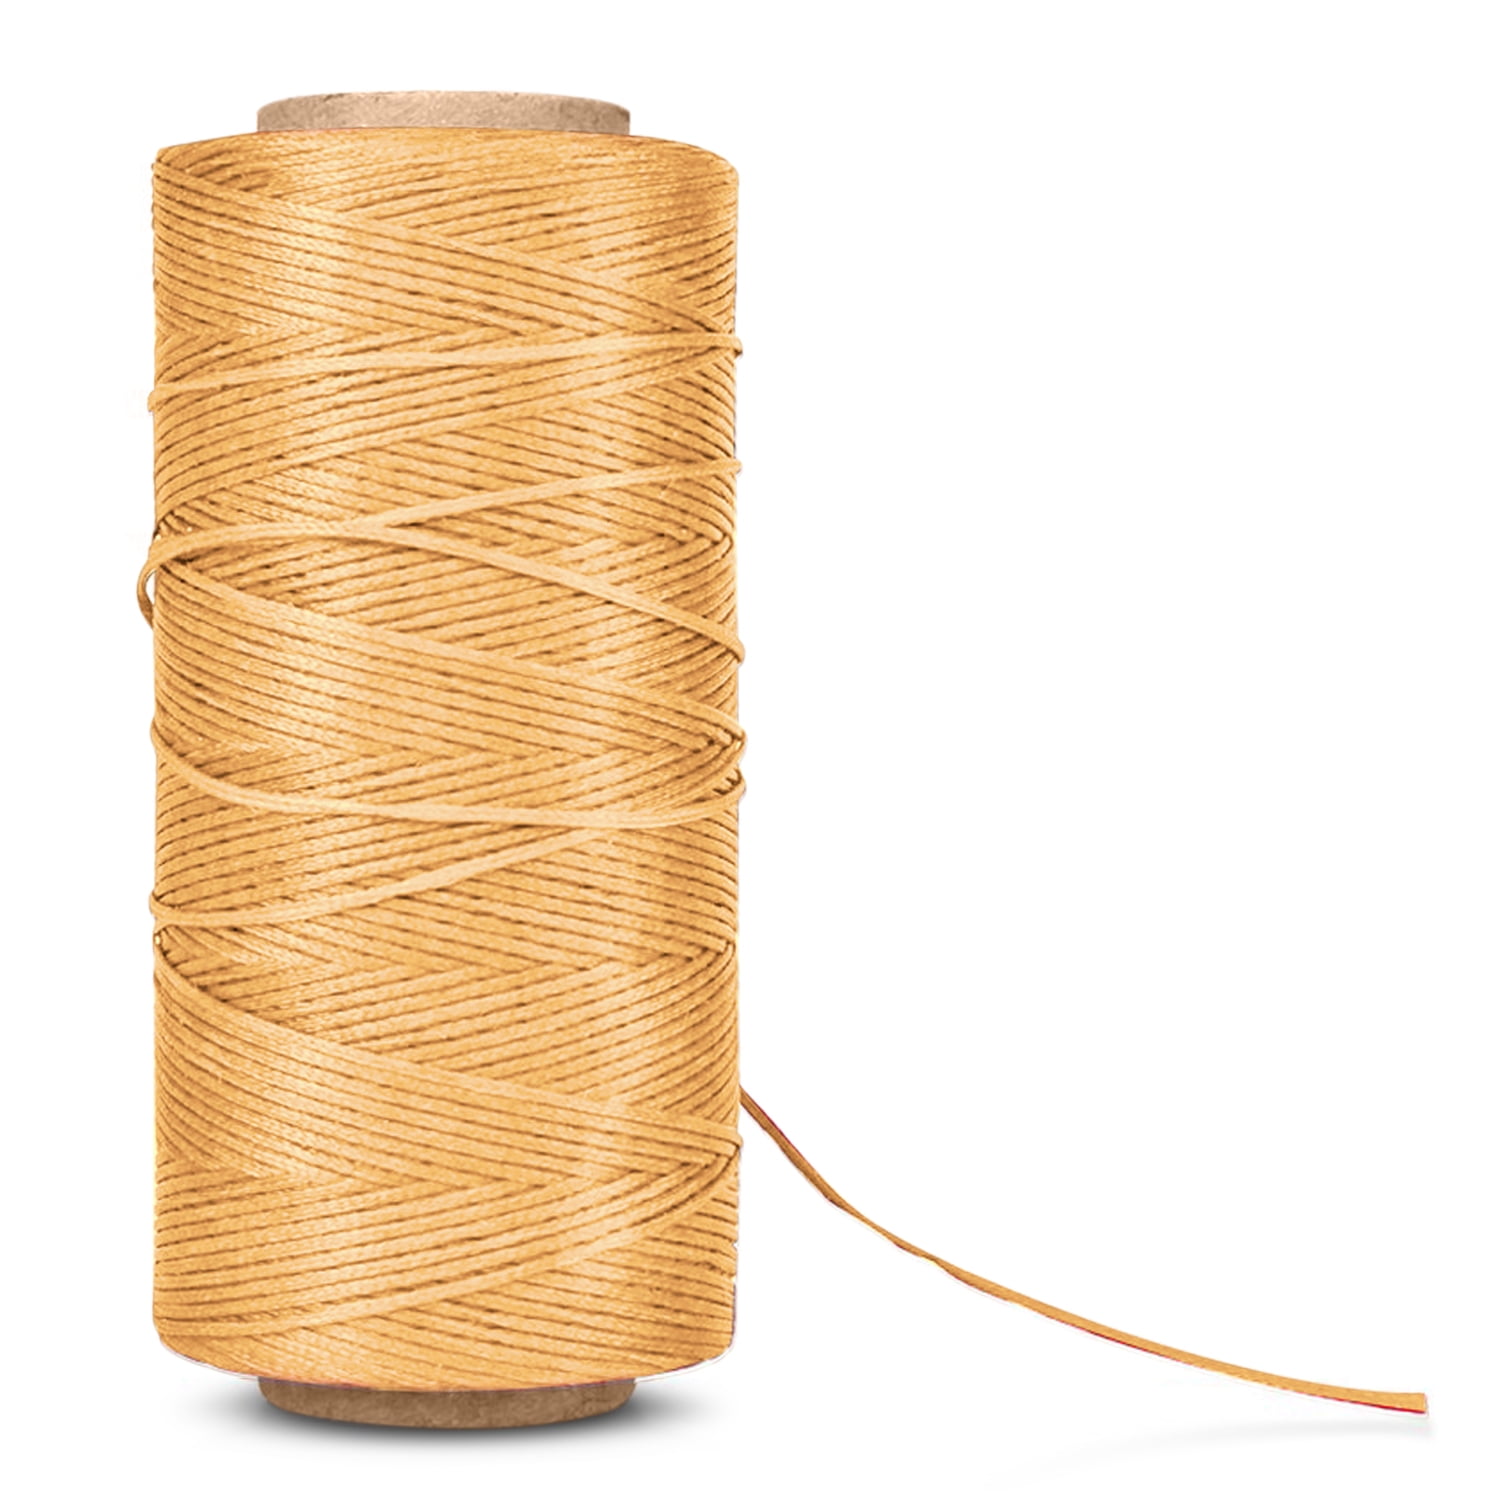 1 Roll 50 Meters 150D Waxed Thread Cord Leather Sewing Cord for Leather Hand Sewing Stitching Handcrafts 1 mm in Diameter Khaki